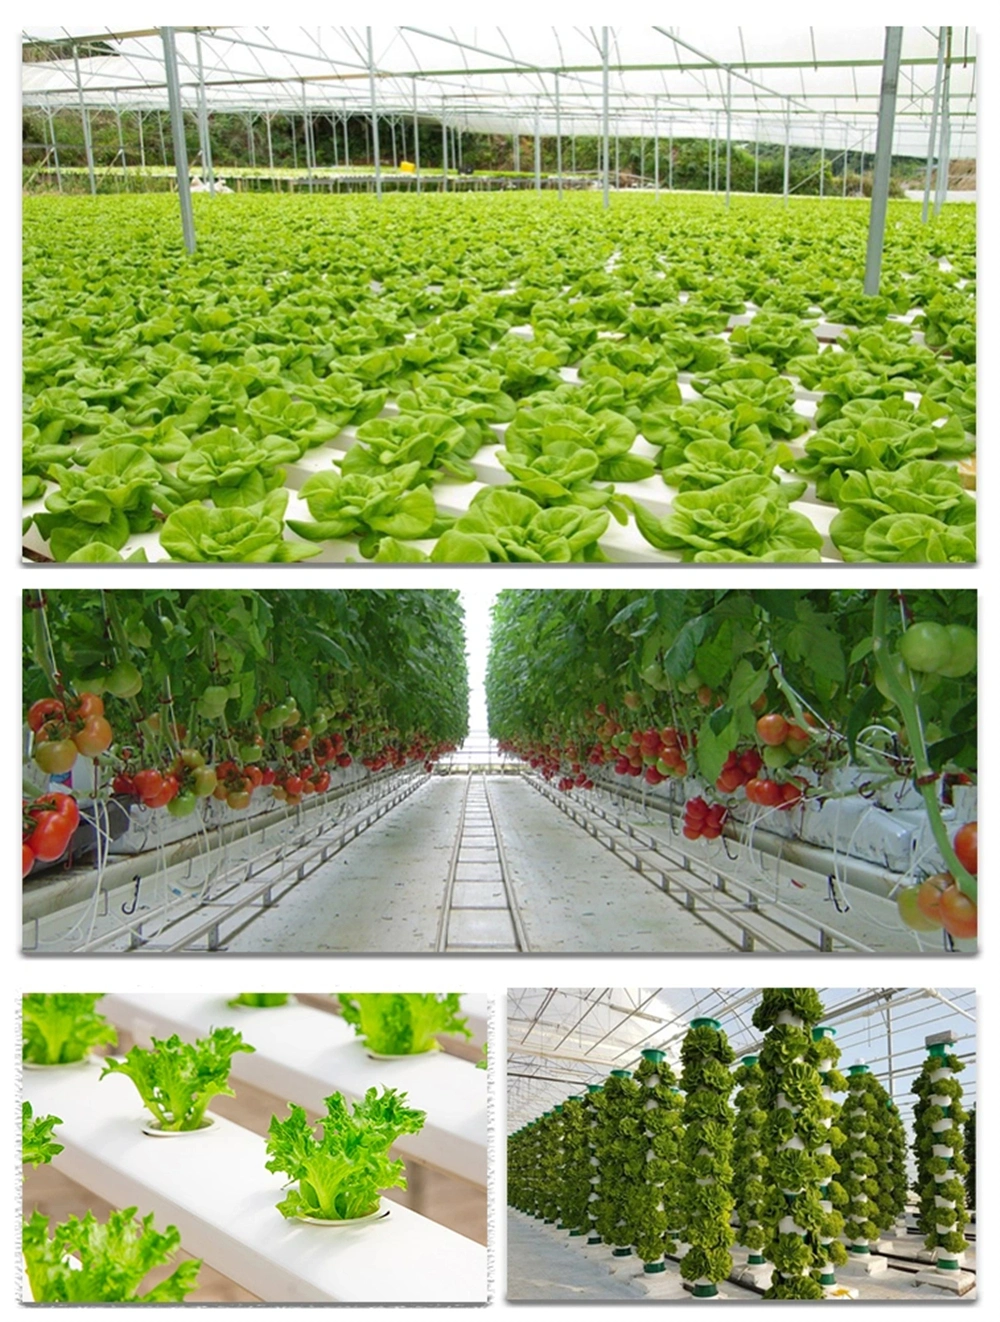 Multi-Span Plastic Film Hydroponic Growing Greenhouse for Tomatoes/Cucumber/Peppers